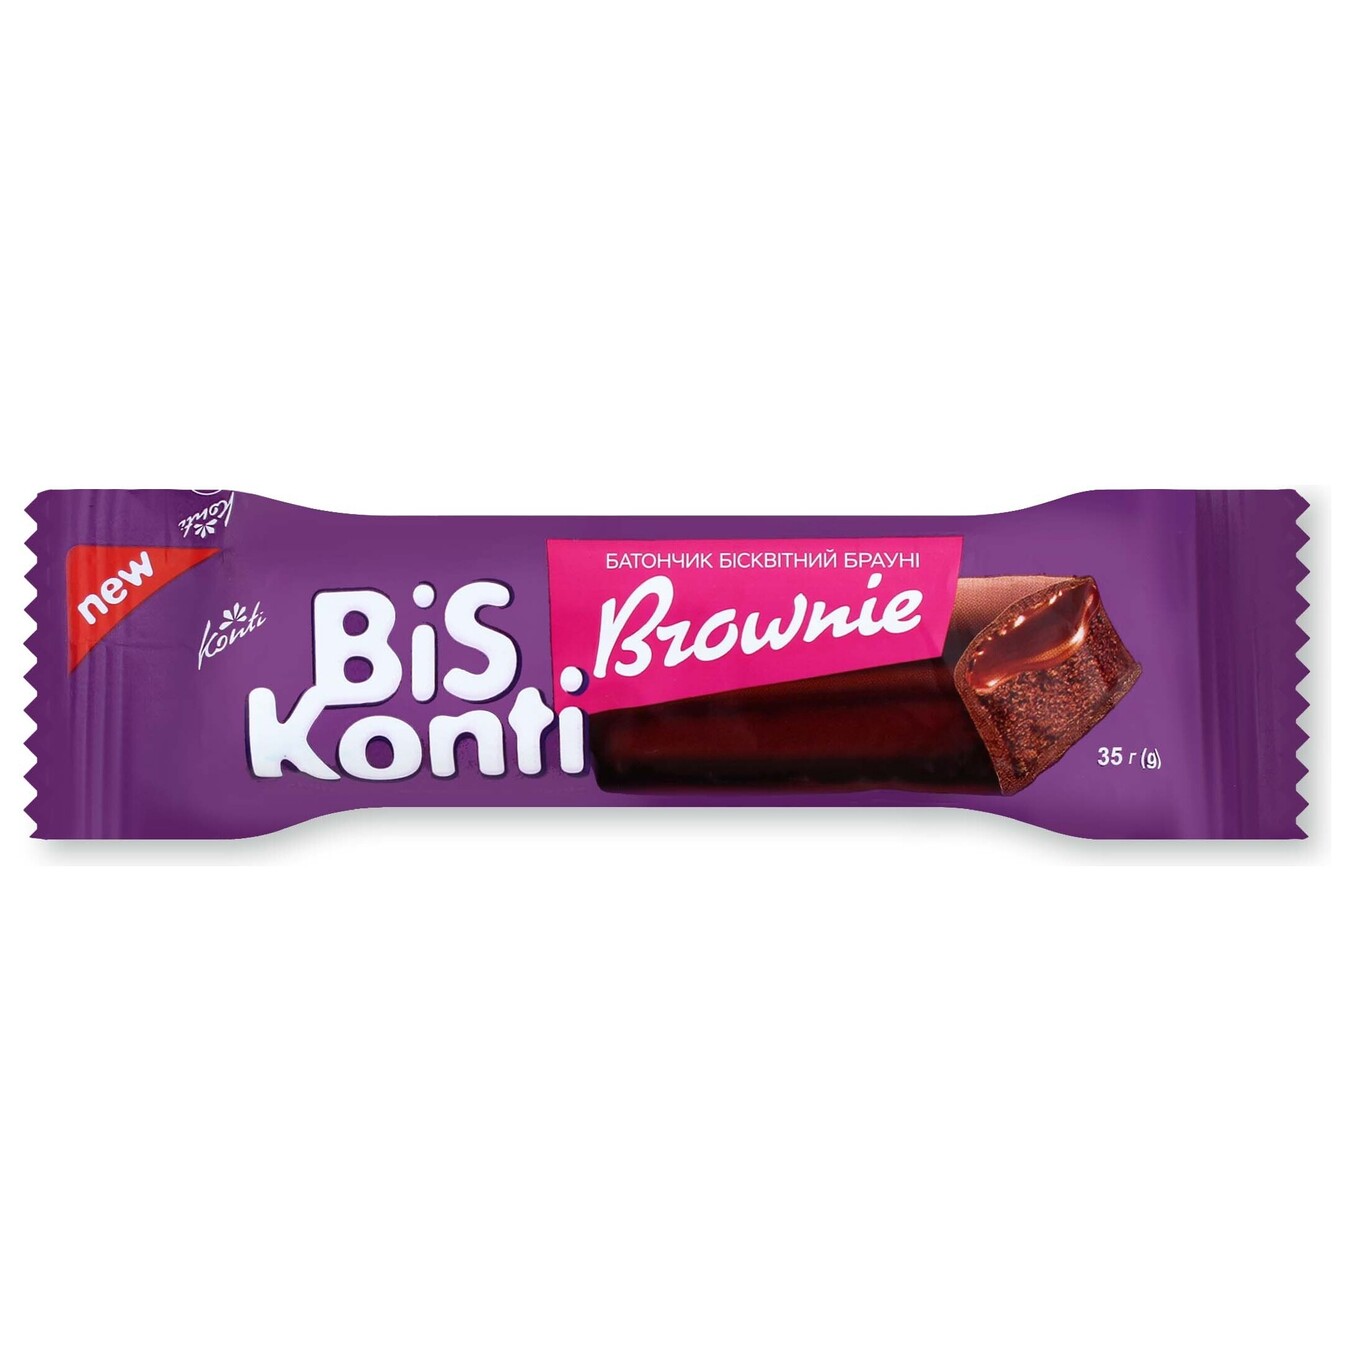 Conti Brown biscuit bar 35 g